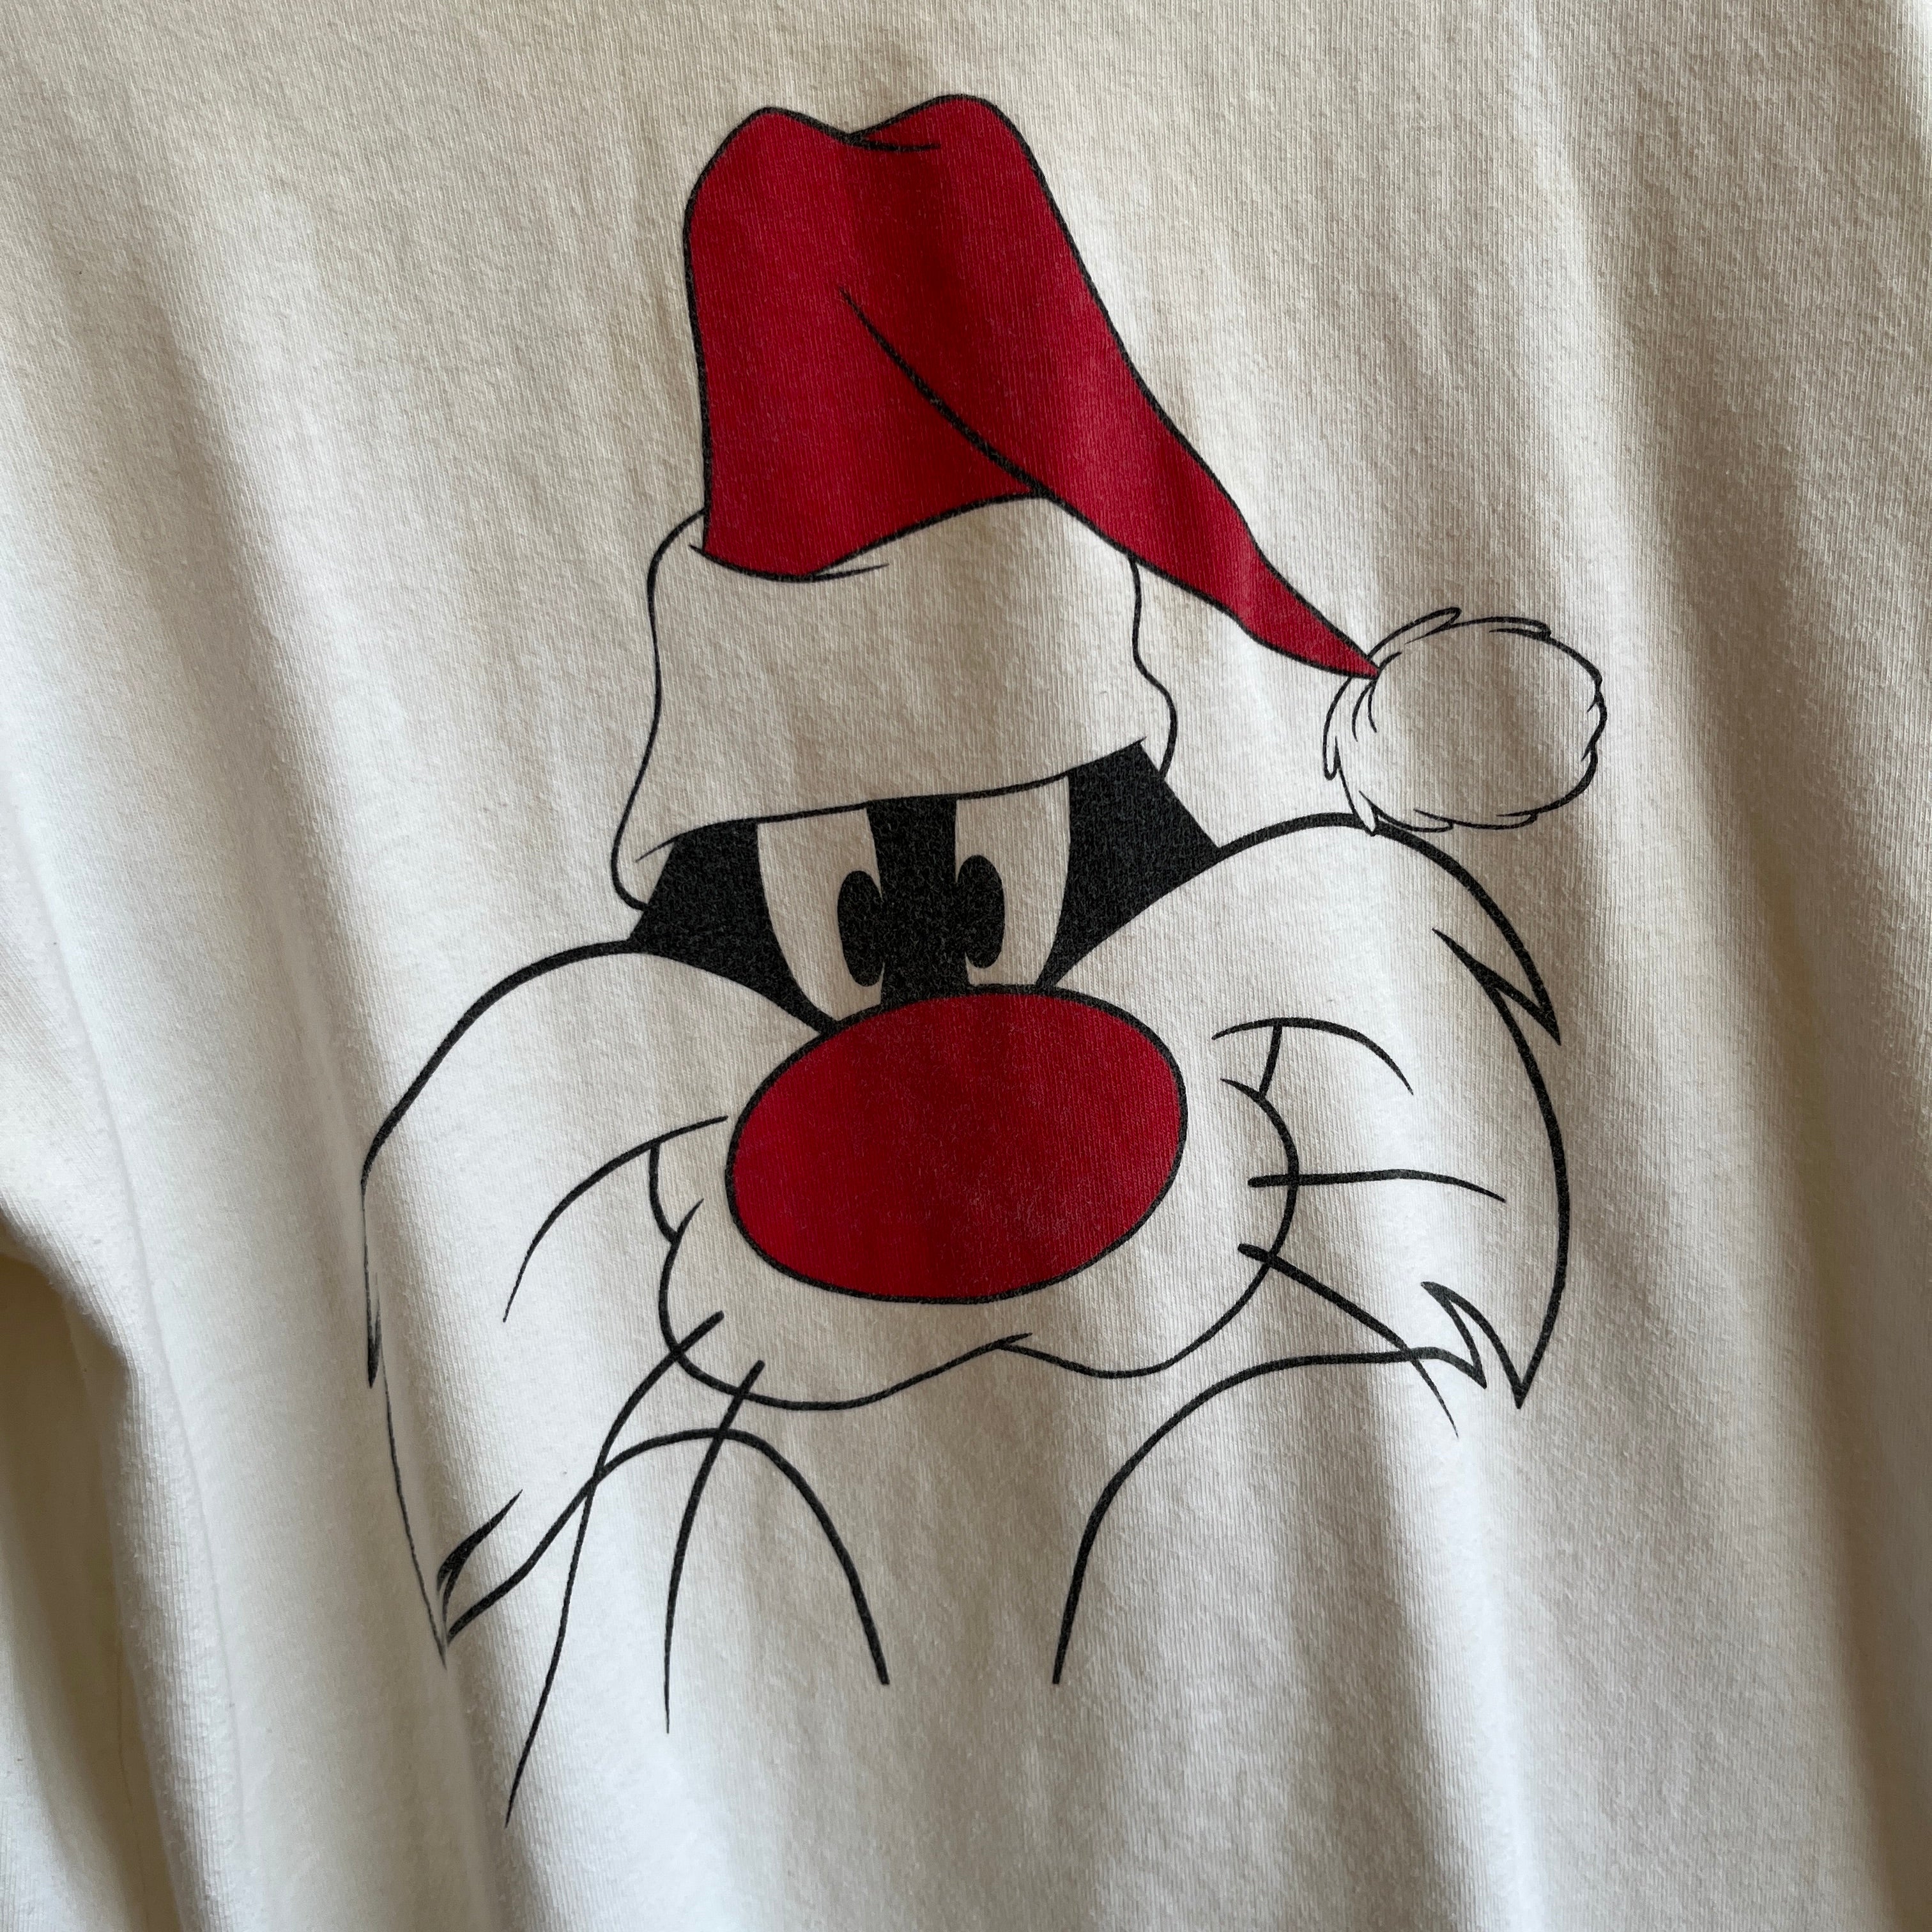 1991 Sylvester Santa Soft Long Sleeve Cotton Shirt with Age Staining